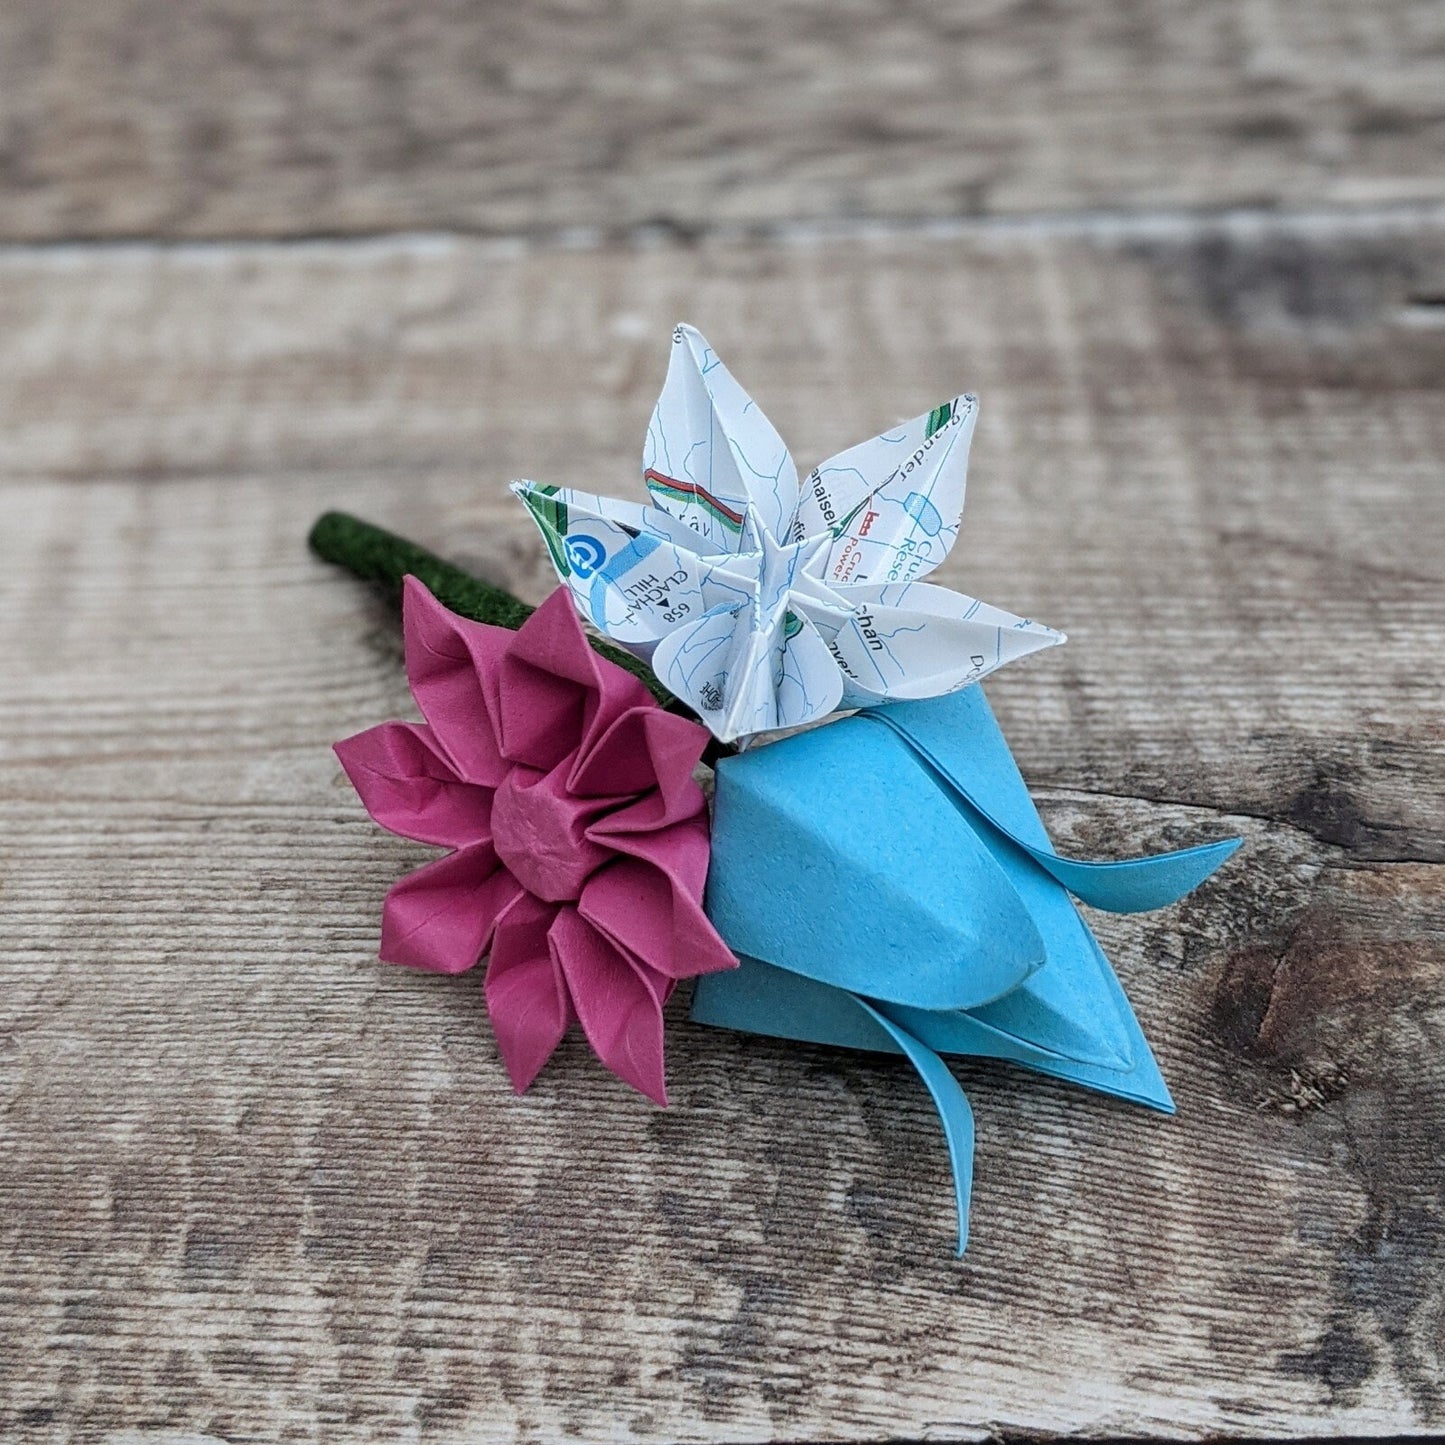 Alternative groom's map paper origami buttonhole / boutonniere